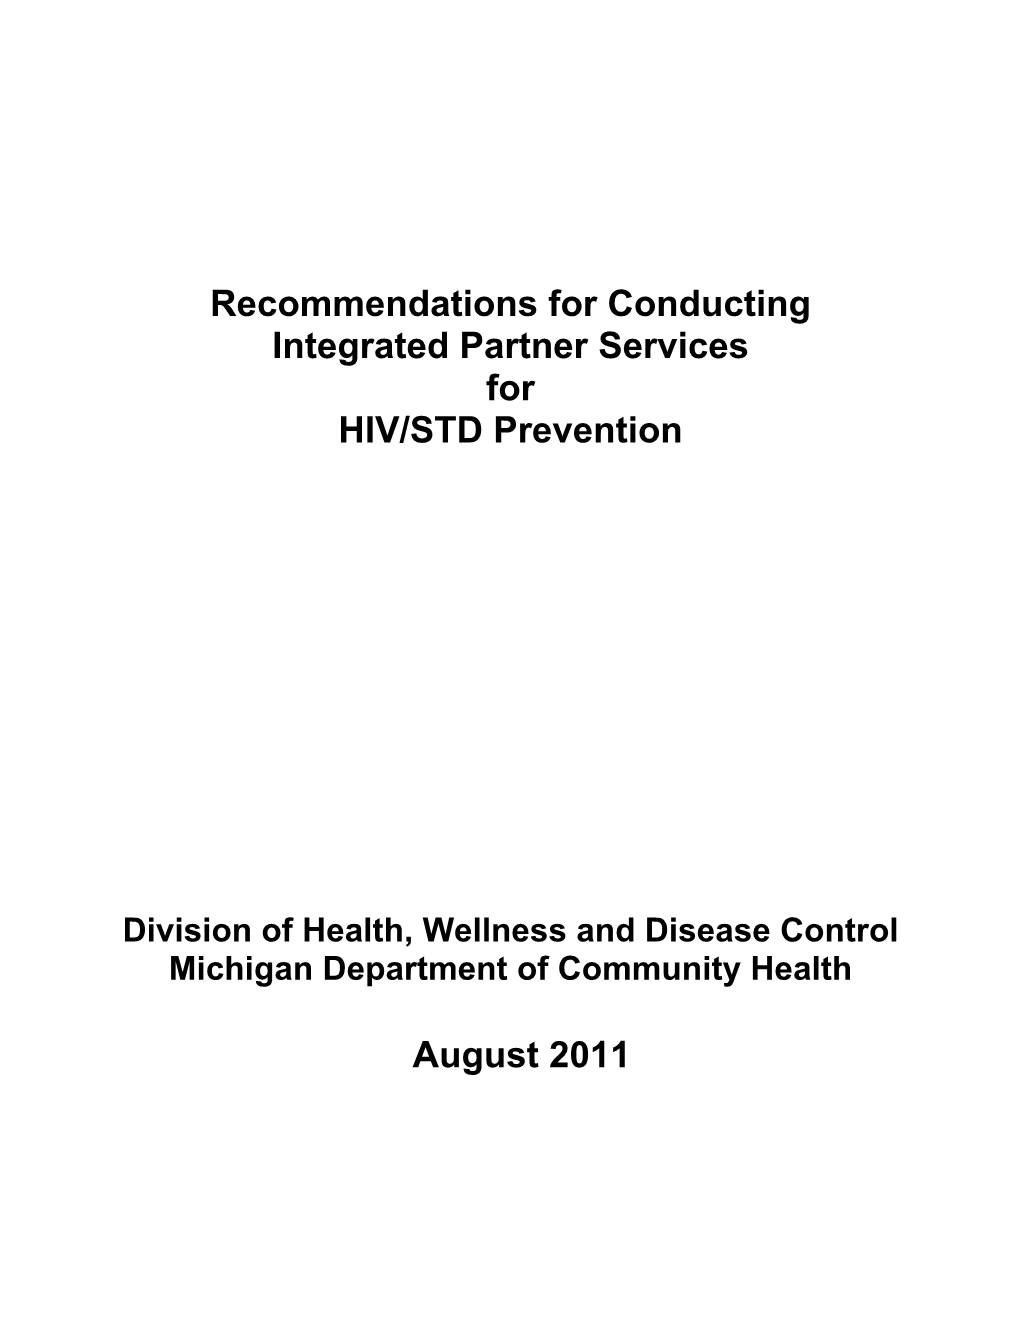 Recommendations for Conducting Integrated Partner Services for HIV/STD Prevention